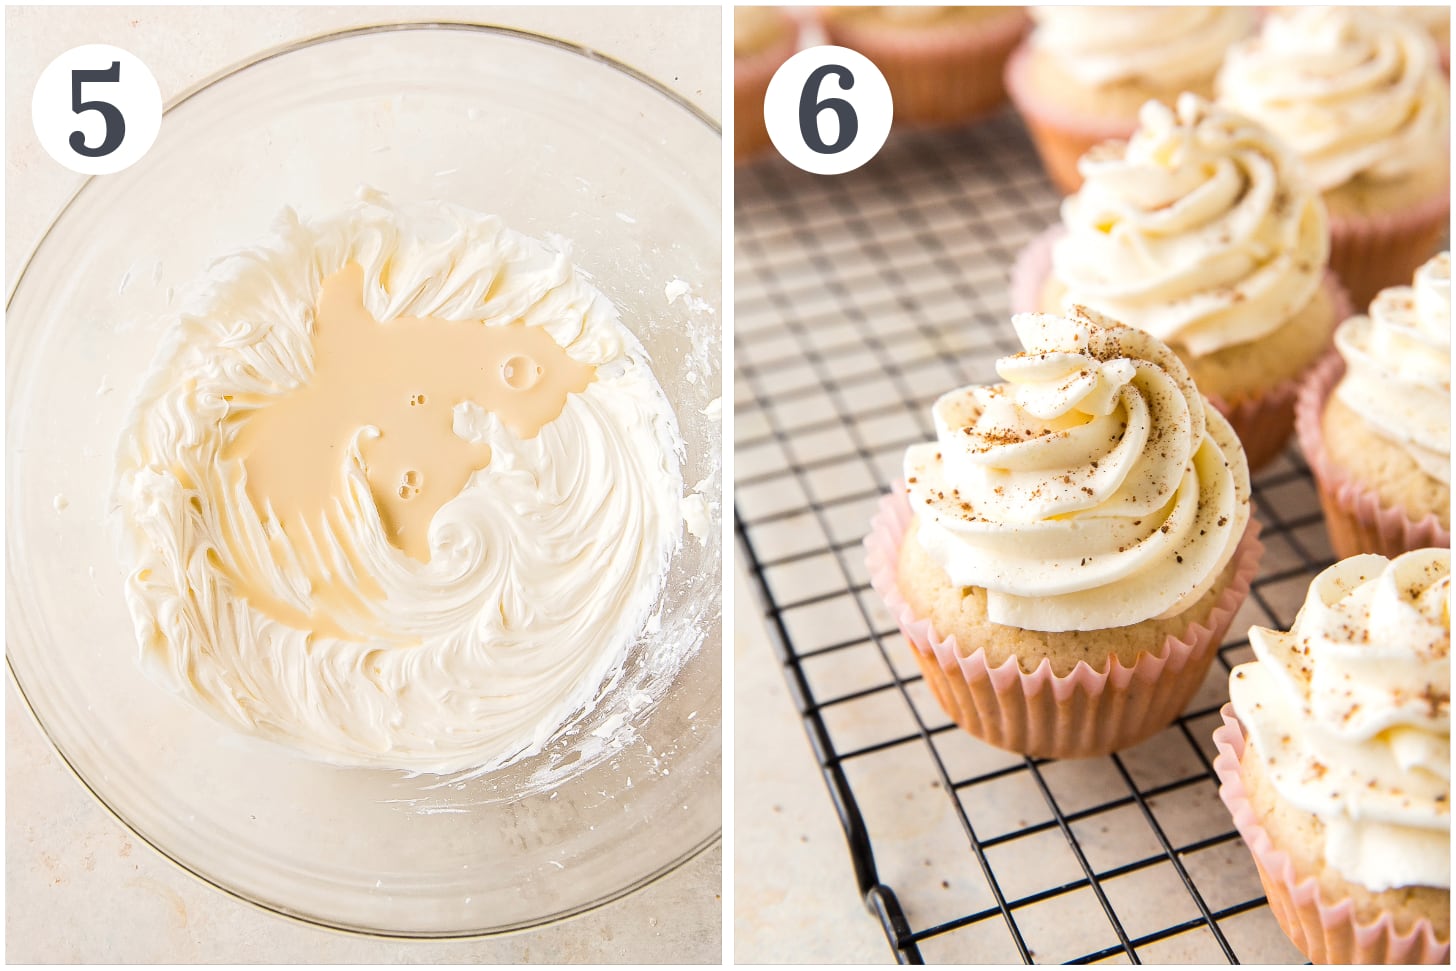 photo collage demonstrating how to make eggnog frosting and frost cupcakes.